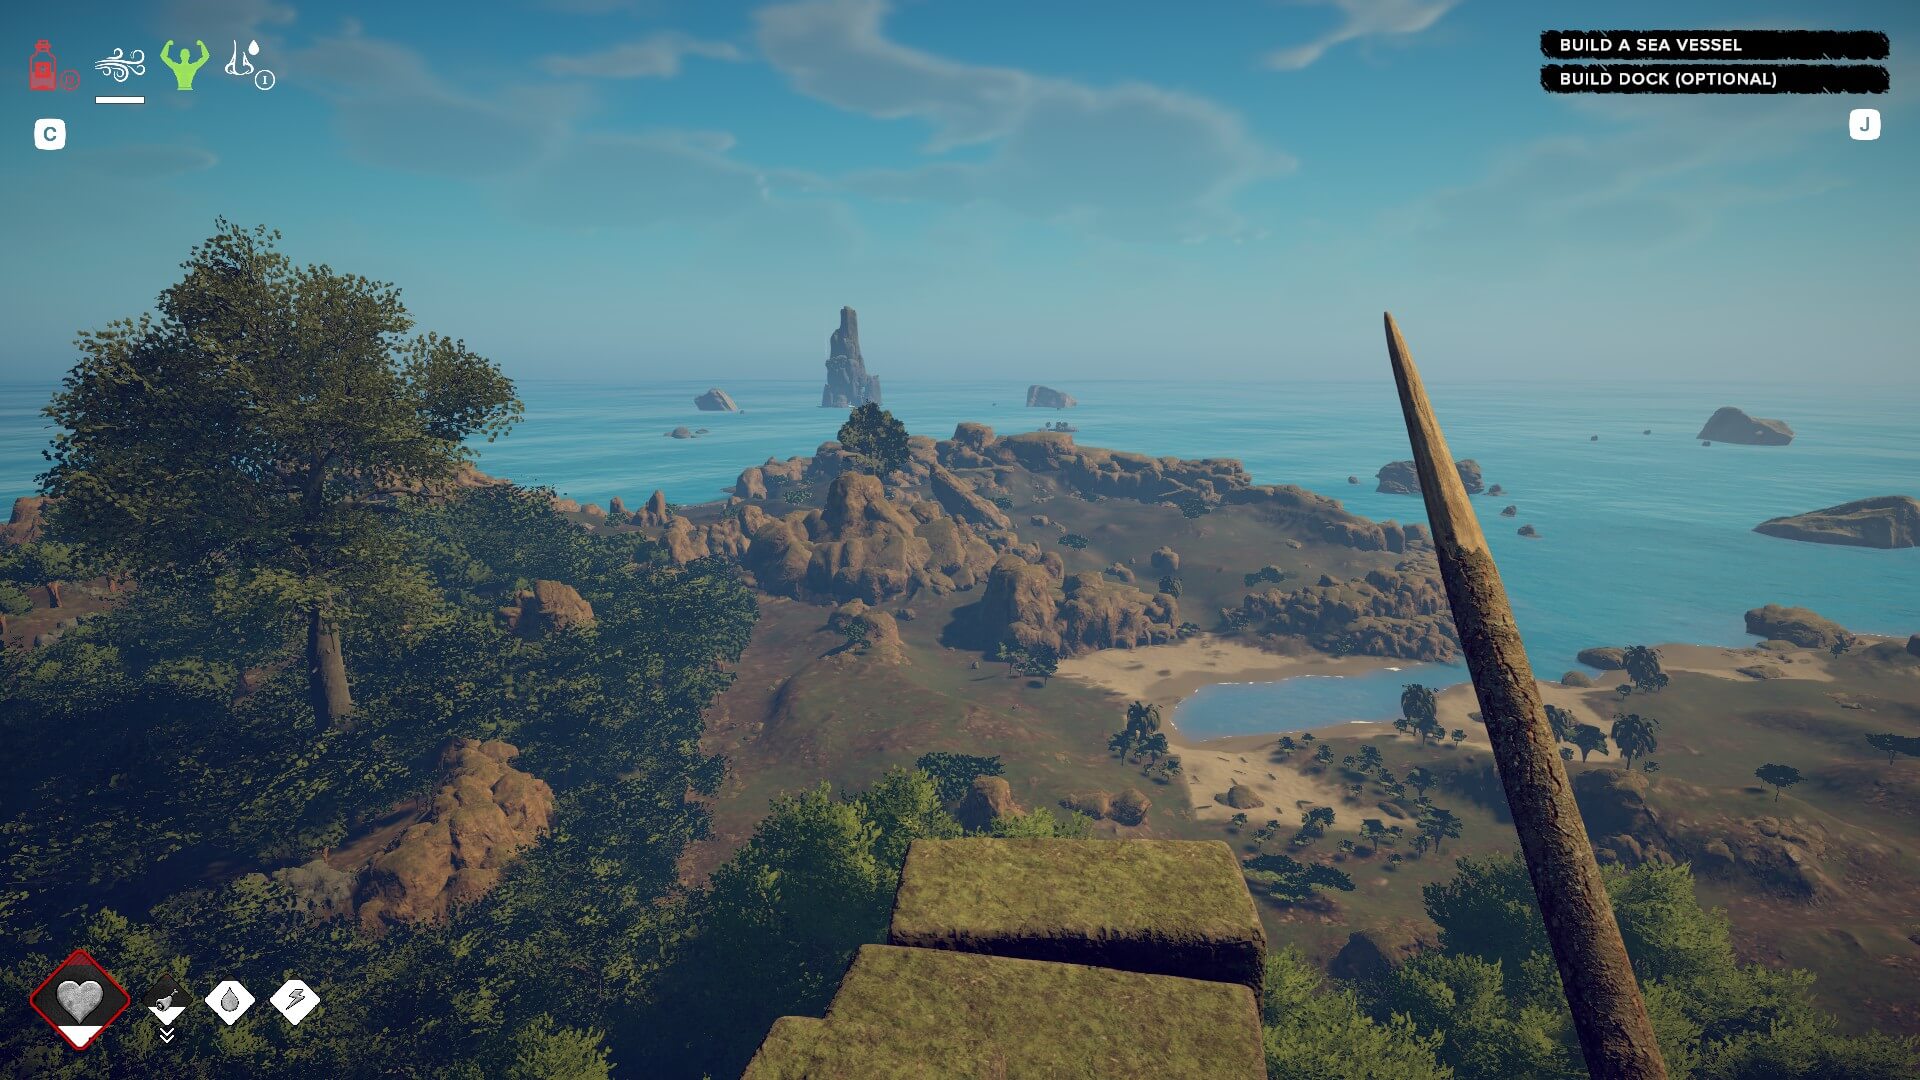 the player is getting a overview of the island from an observatry located in the mountains. A largew tree seen is one of the many cartographer trees scattered throughout the world.